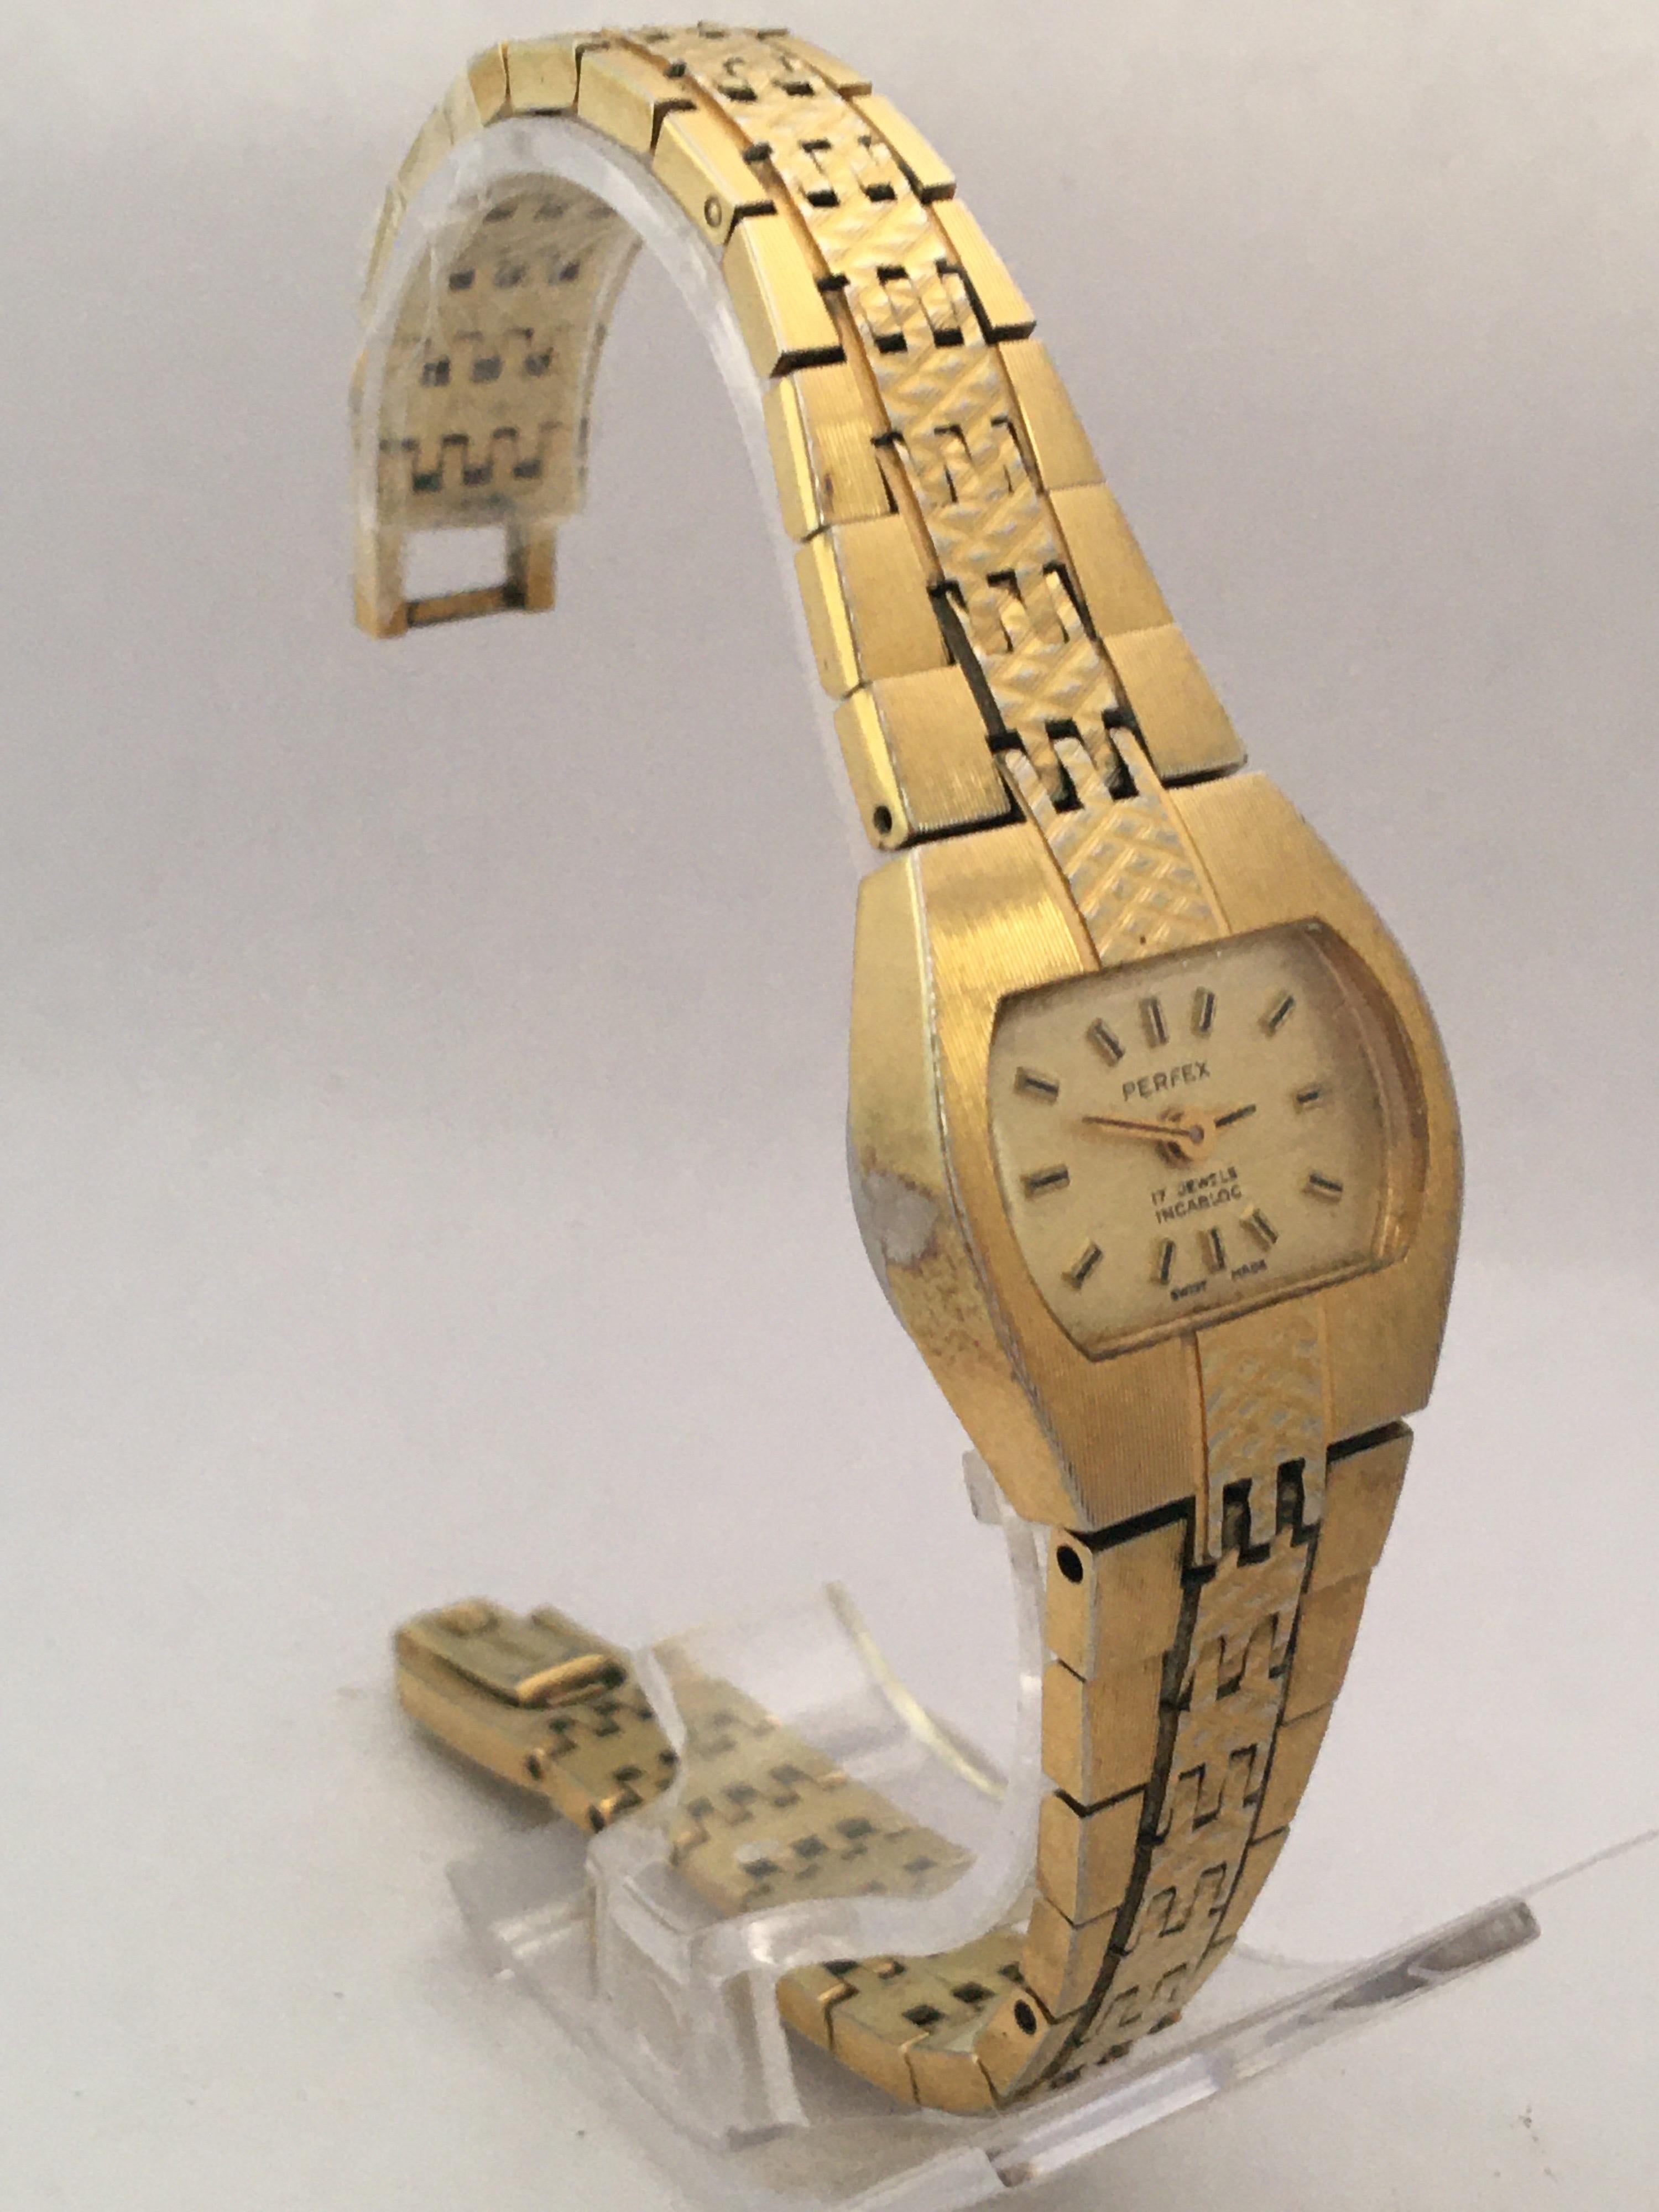 22k electro gold plated fitron watch price